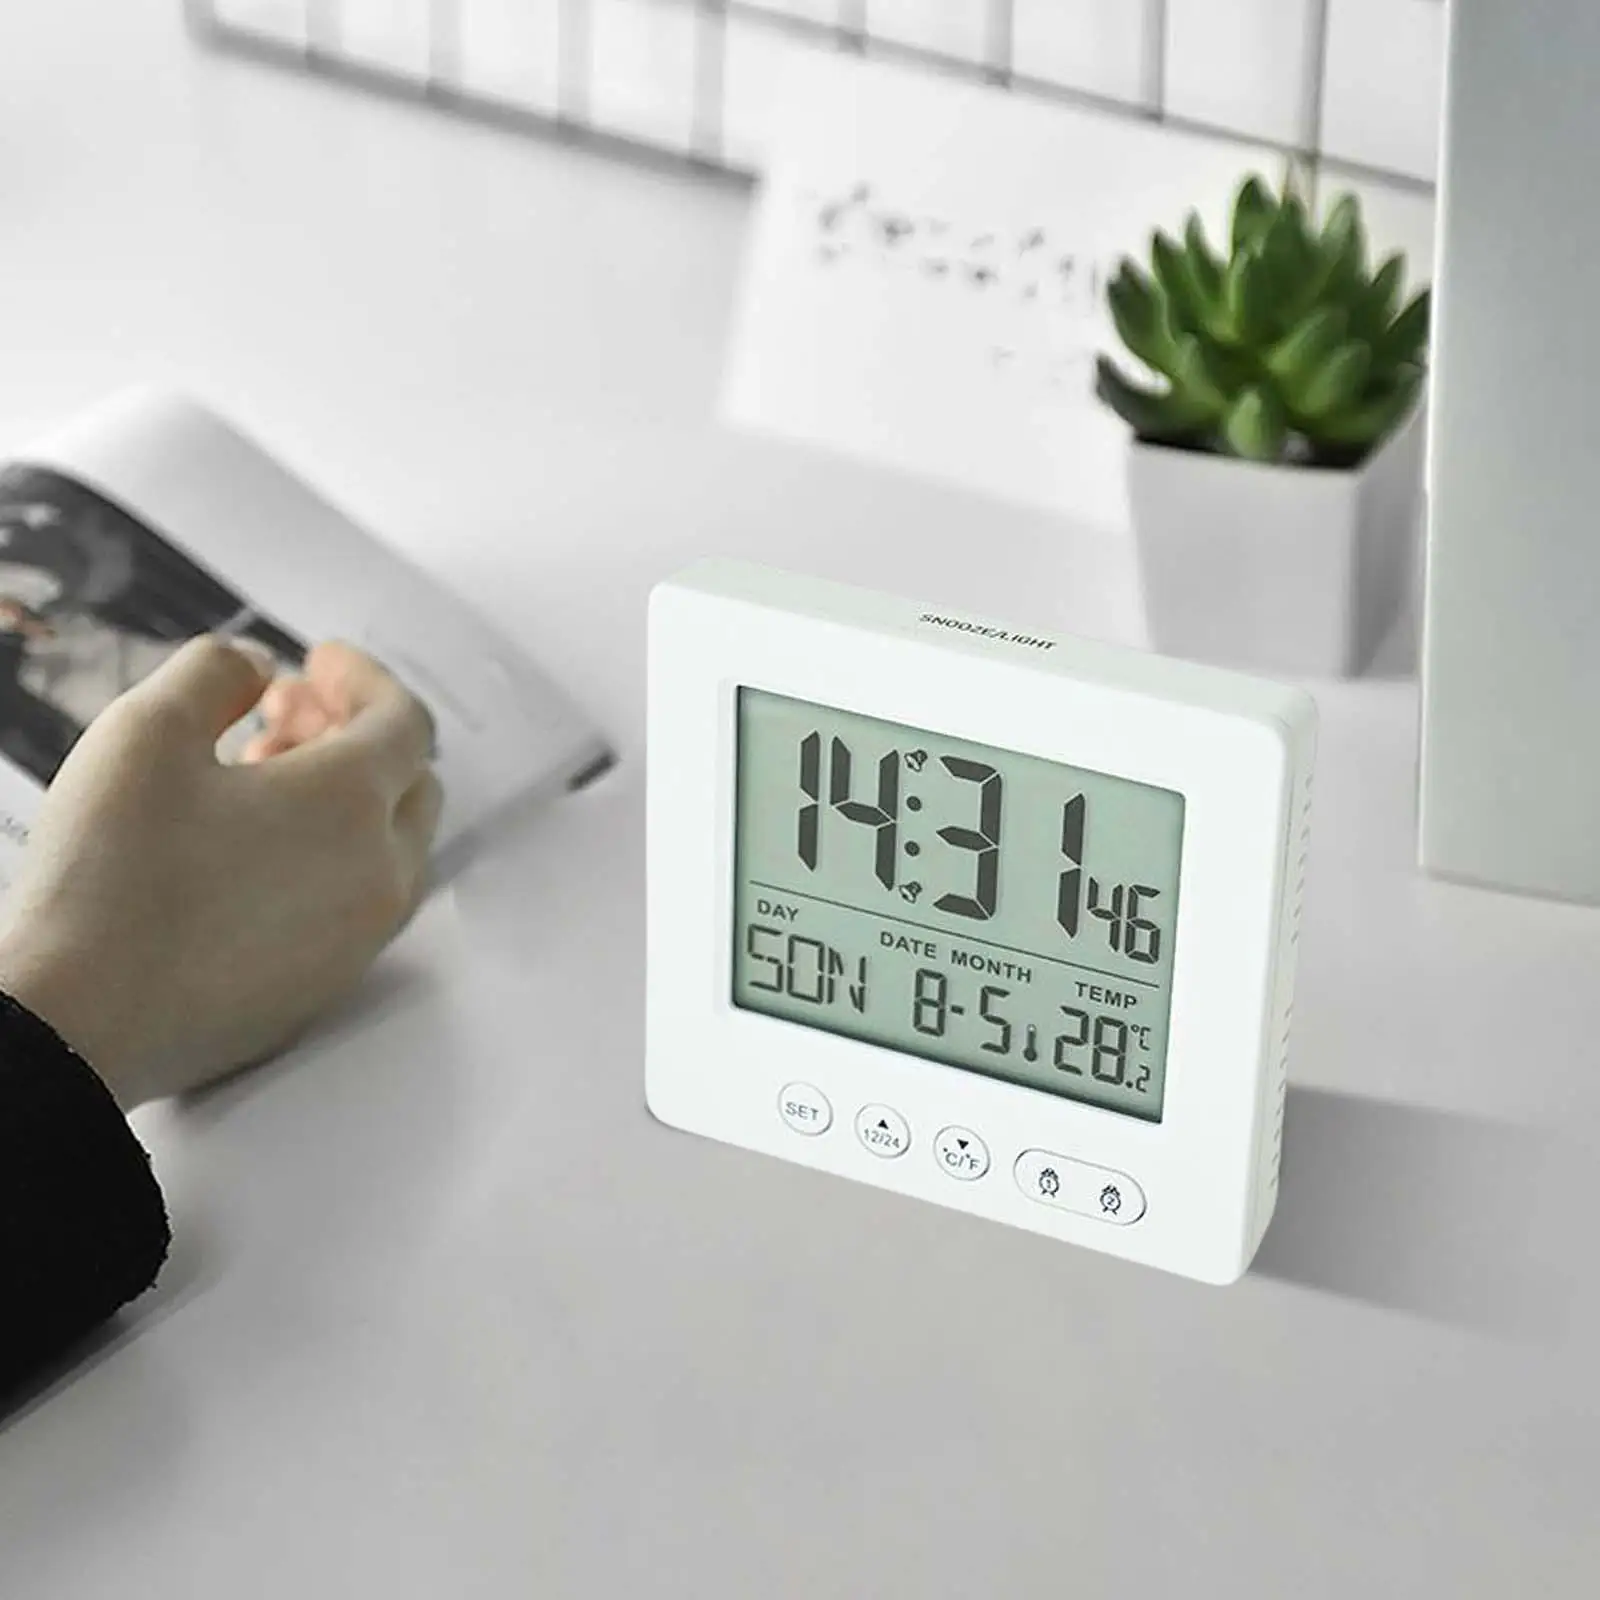 Digital Clock Modern Snooze Time Week Date Temperature Display LCD Night Light Clocks for Dining Room Decor Gift Office